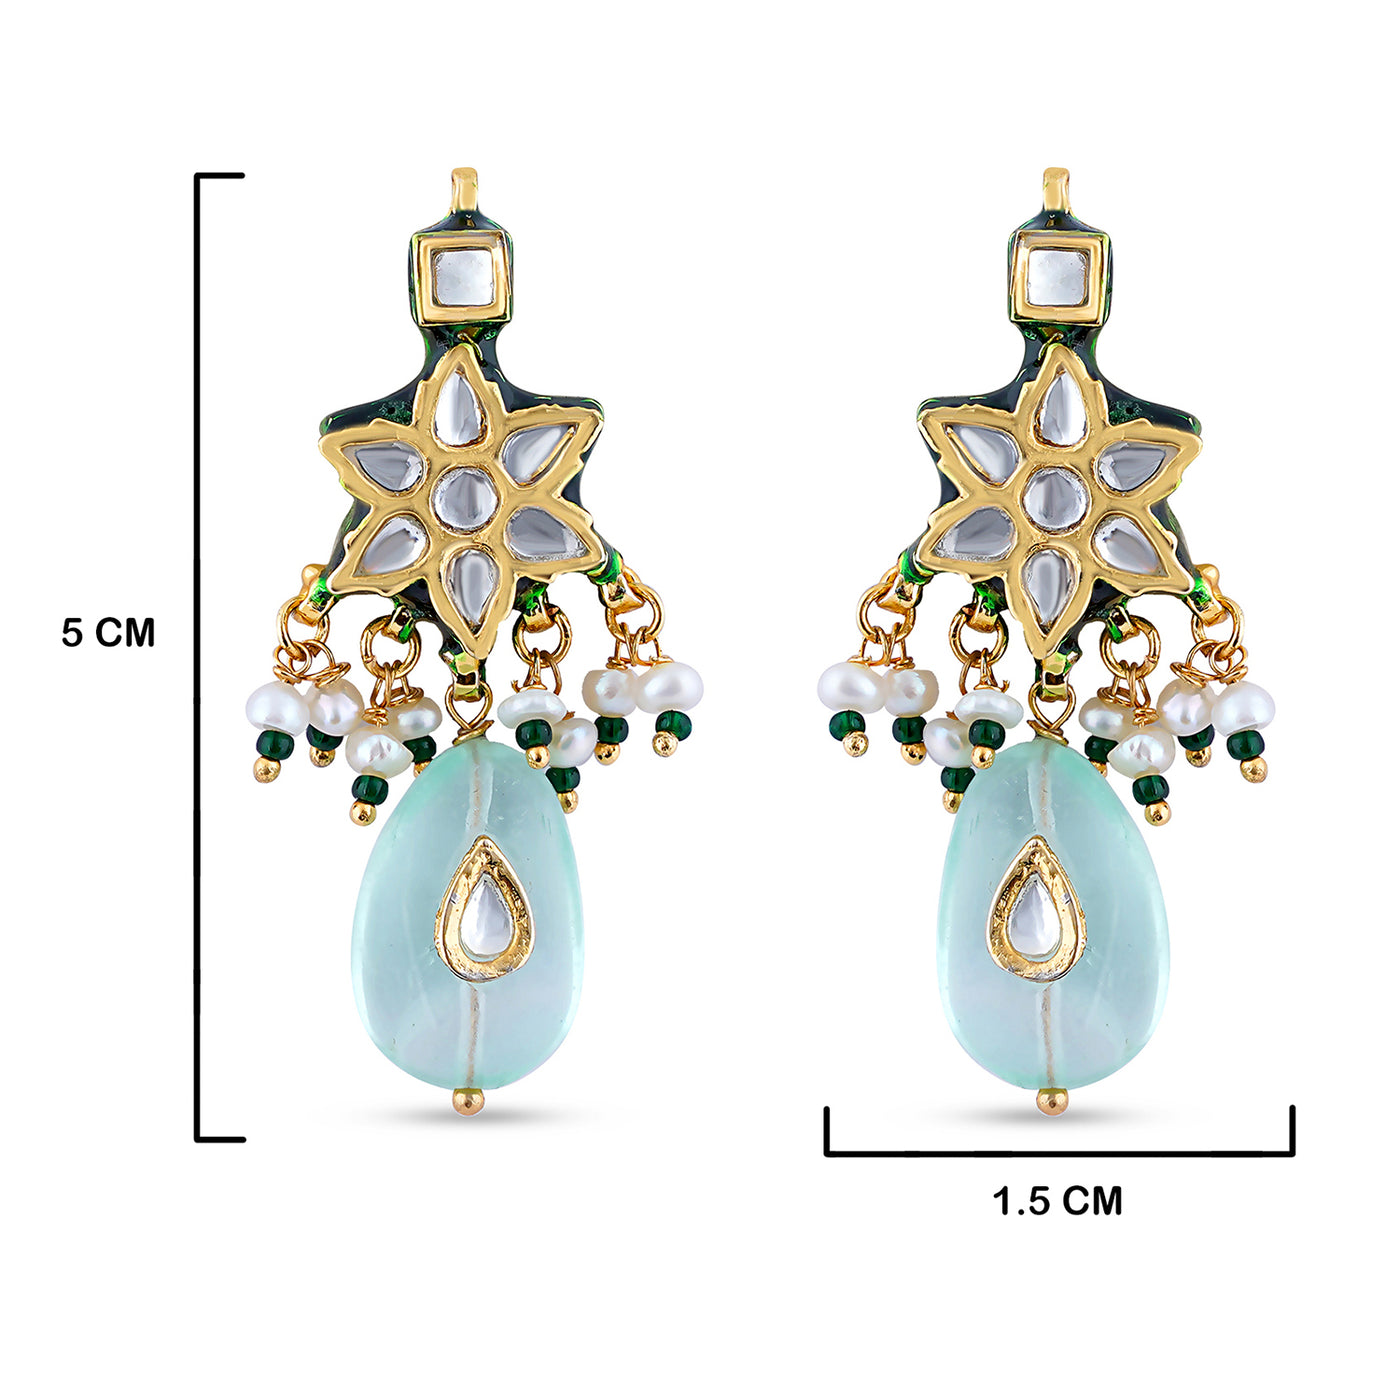 Fluorite Dangle Kundan Earrings with measurements in cm. 5cm in height and 1.5cm in length.